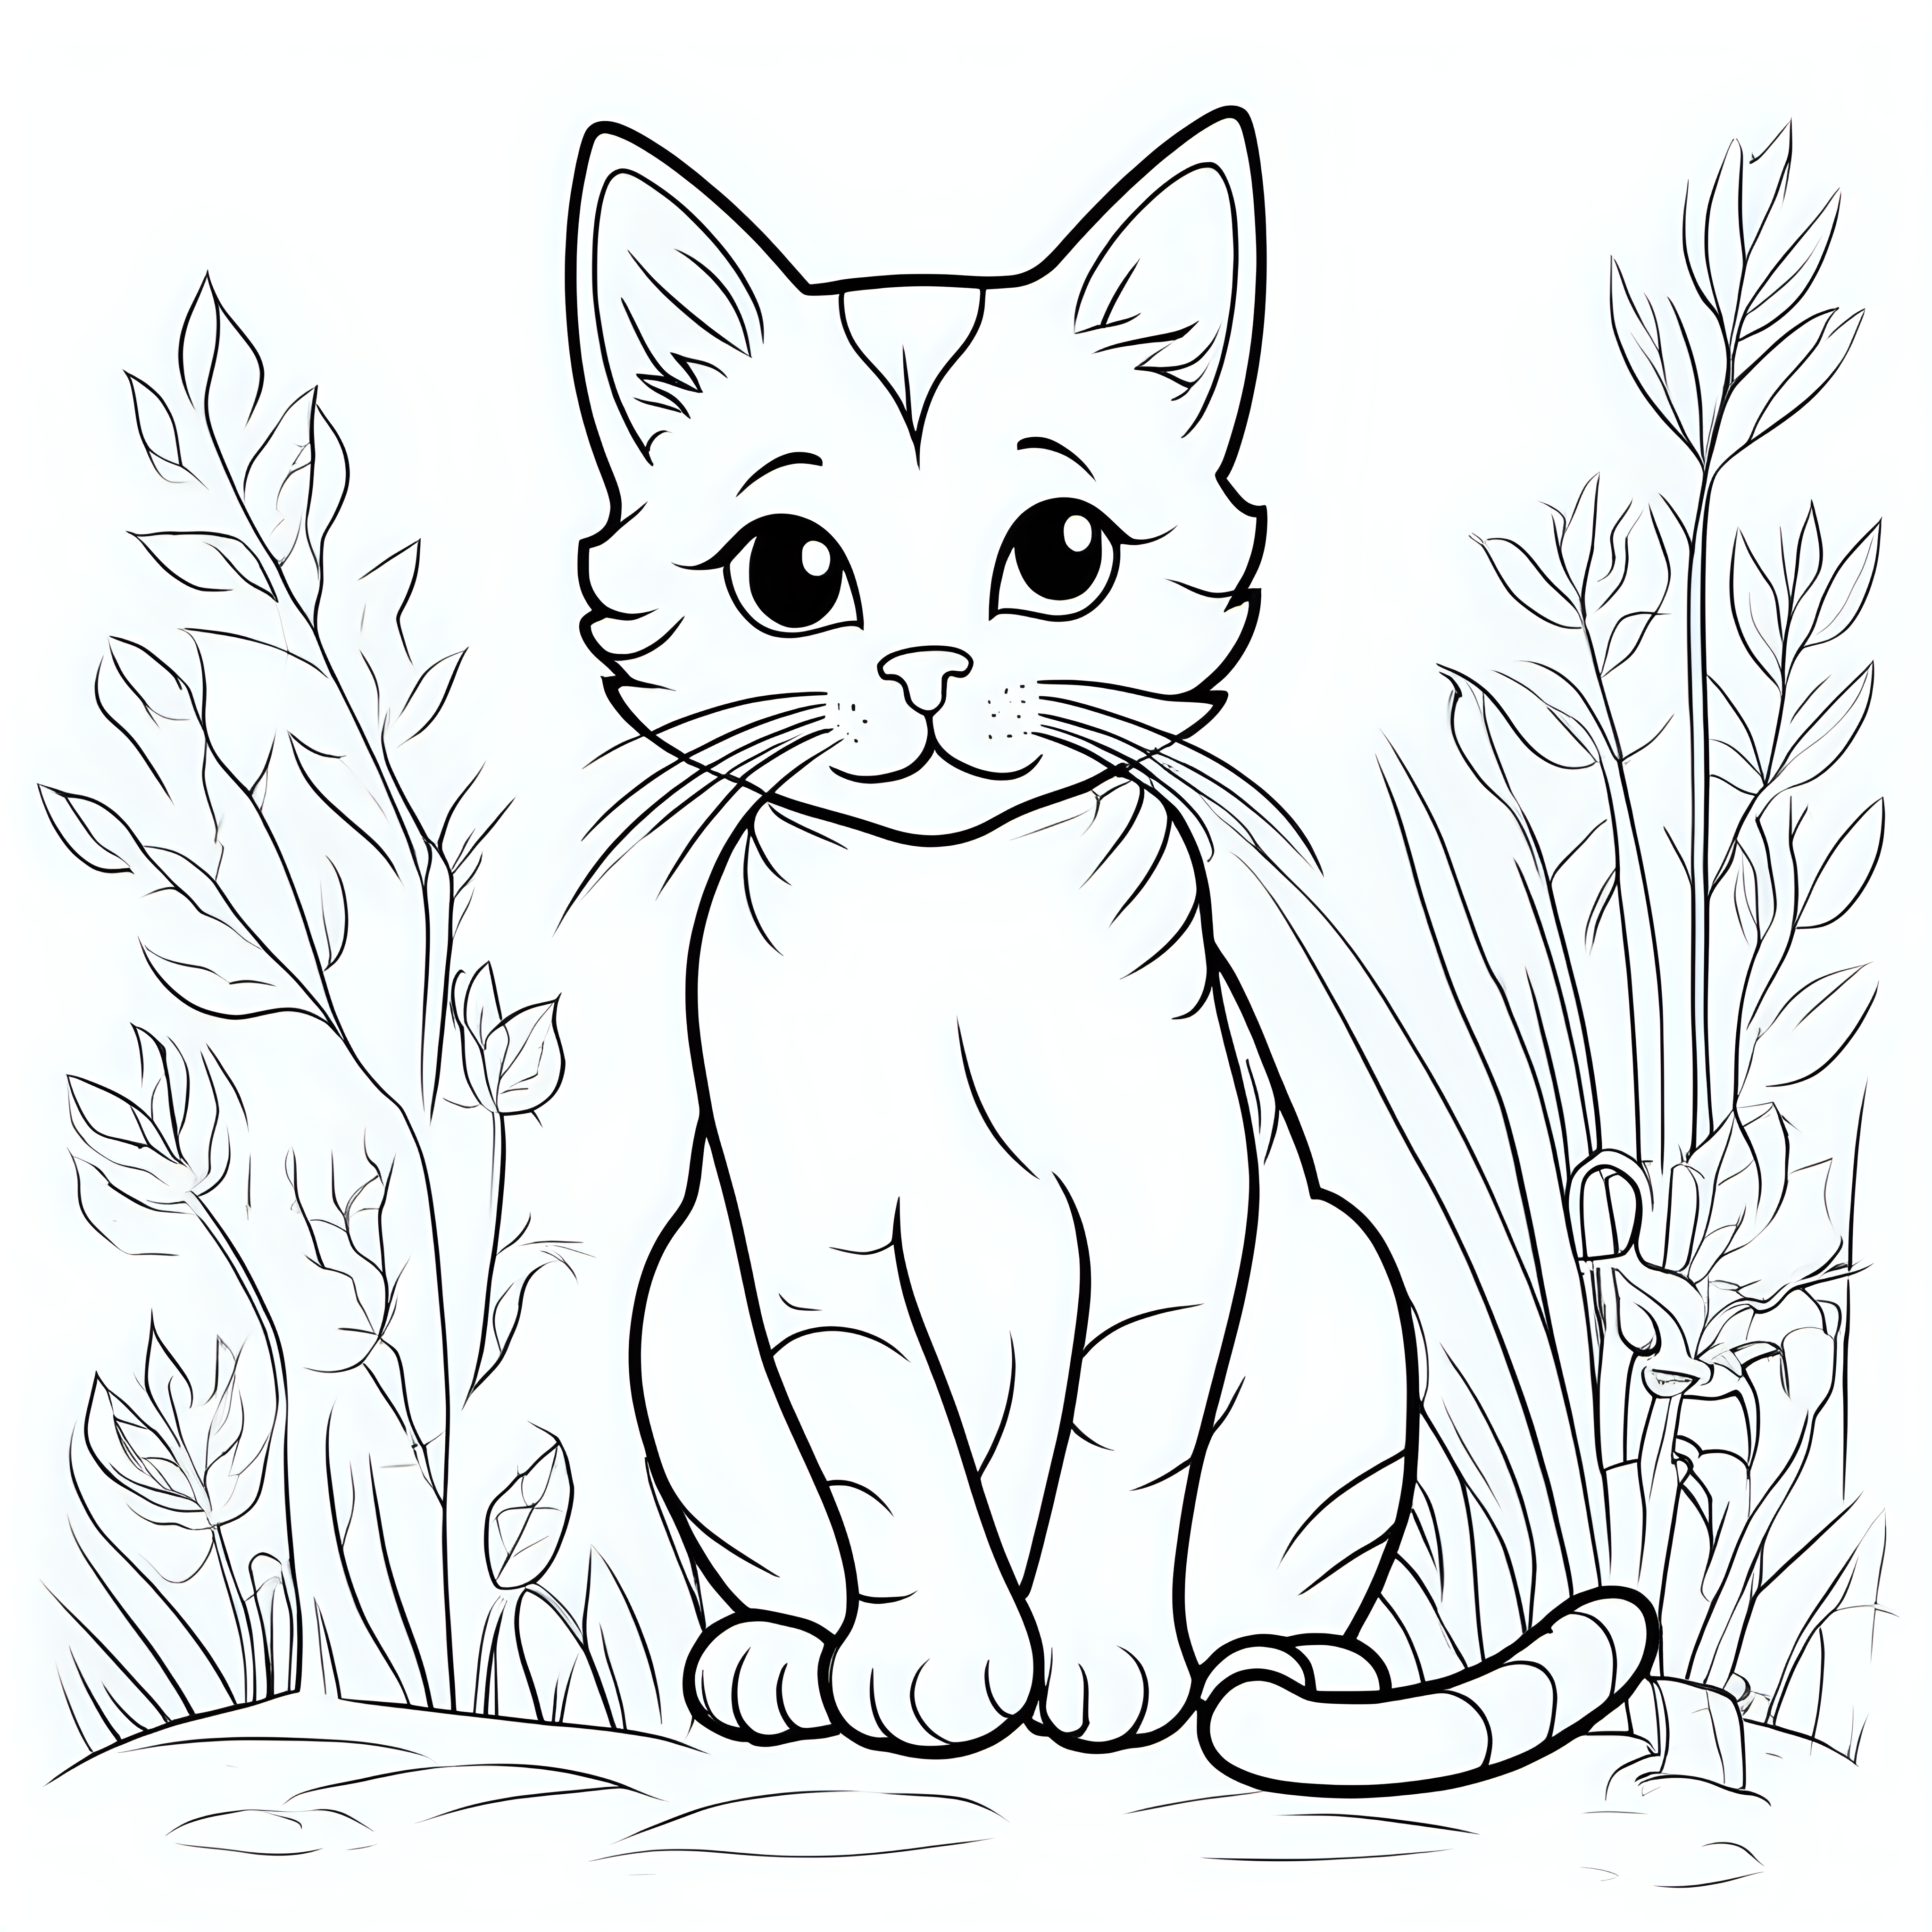 draw cute cat playing with only the outline